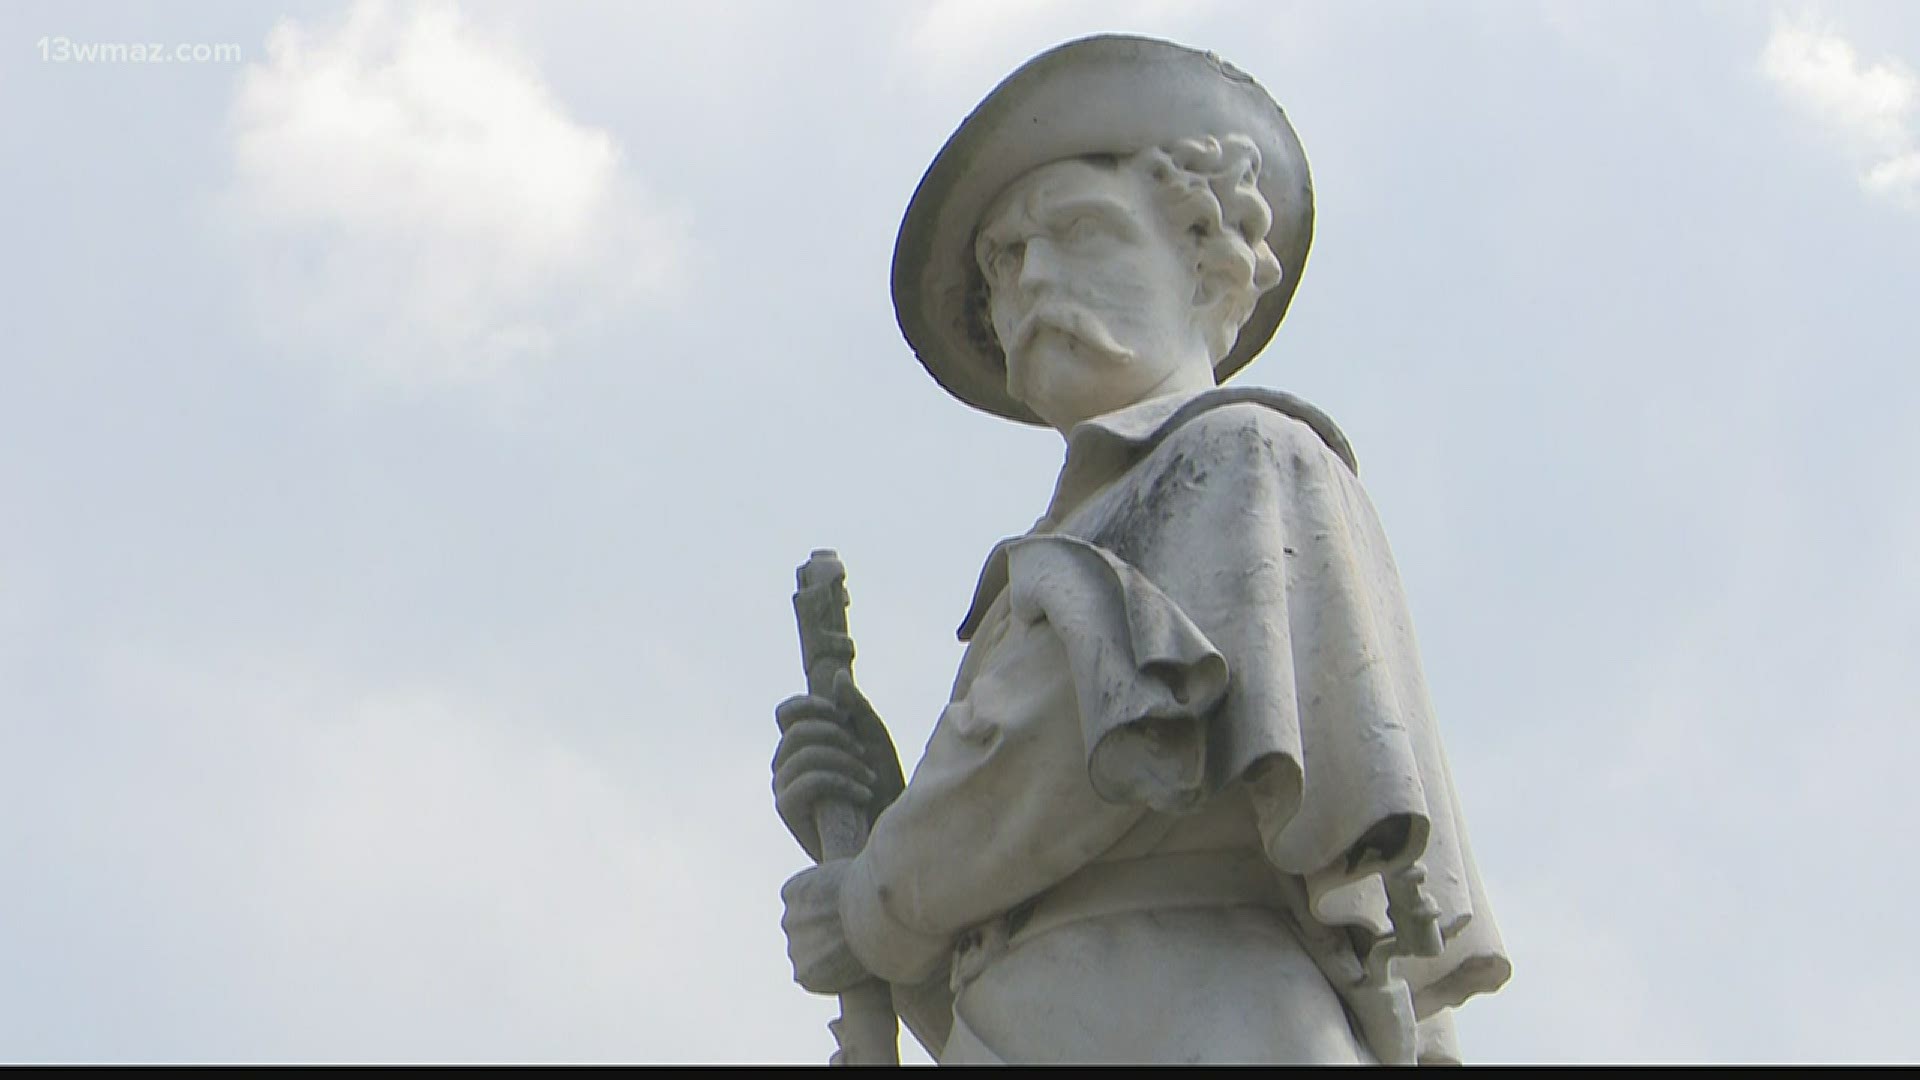 Some say now is time for the confederate monument at the corner of Second Street and Cotton Avenue to go, but state law will make that tough.